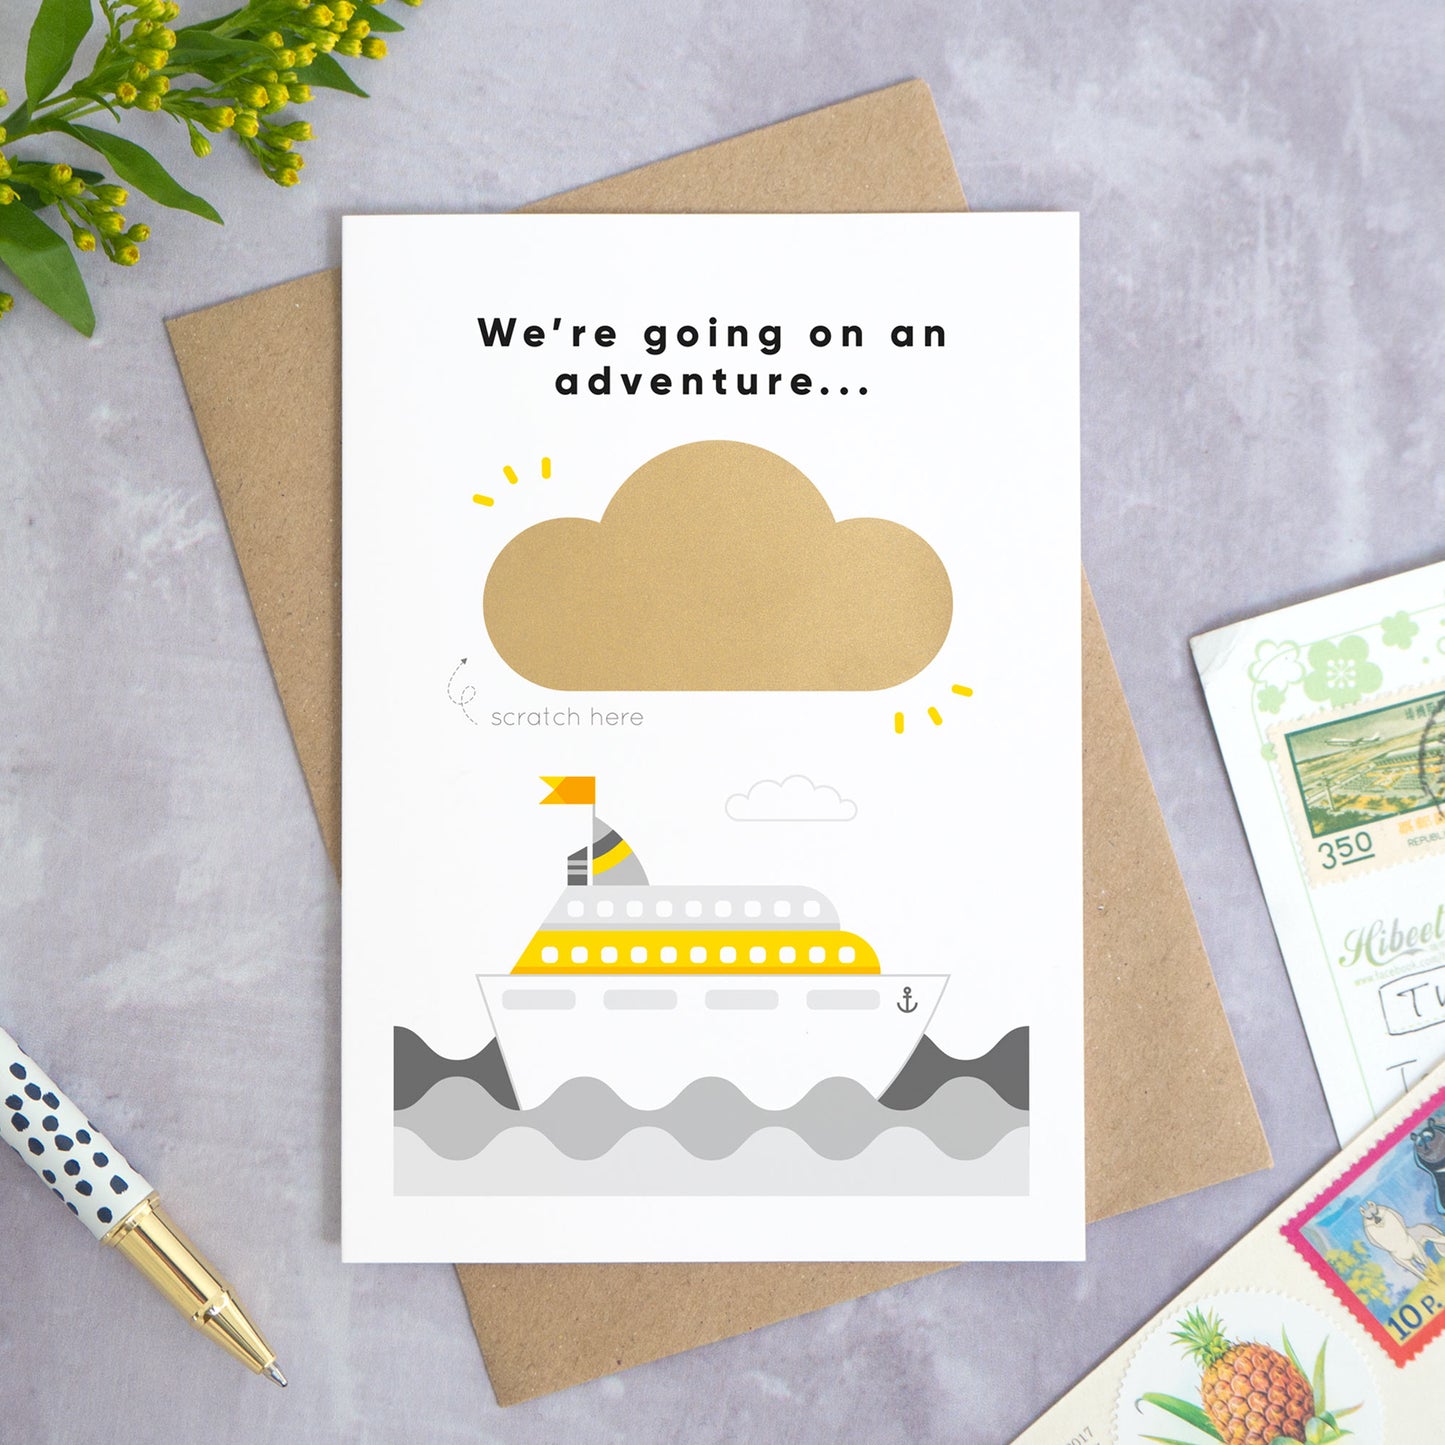 A personalised cruise ship holiday announcement scratch card photographed on a grey concrete background with greenery, a pen and postcards around the edge. The card is set upon a kraft brown envelope. The card is in the grey colour palette and the cloud has yet to be scratched off.